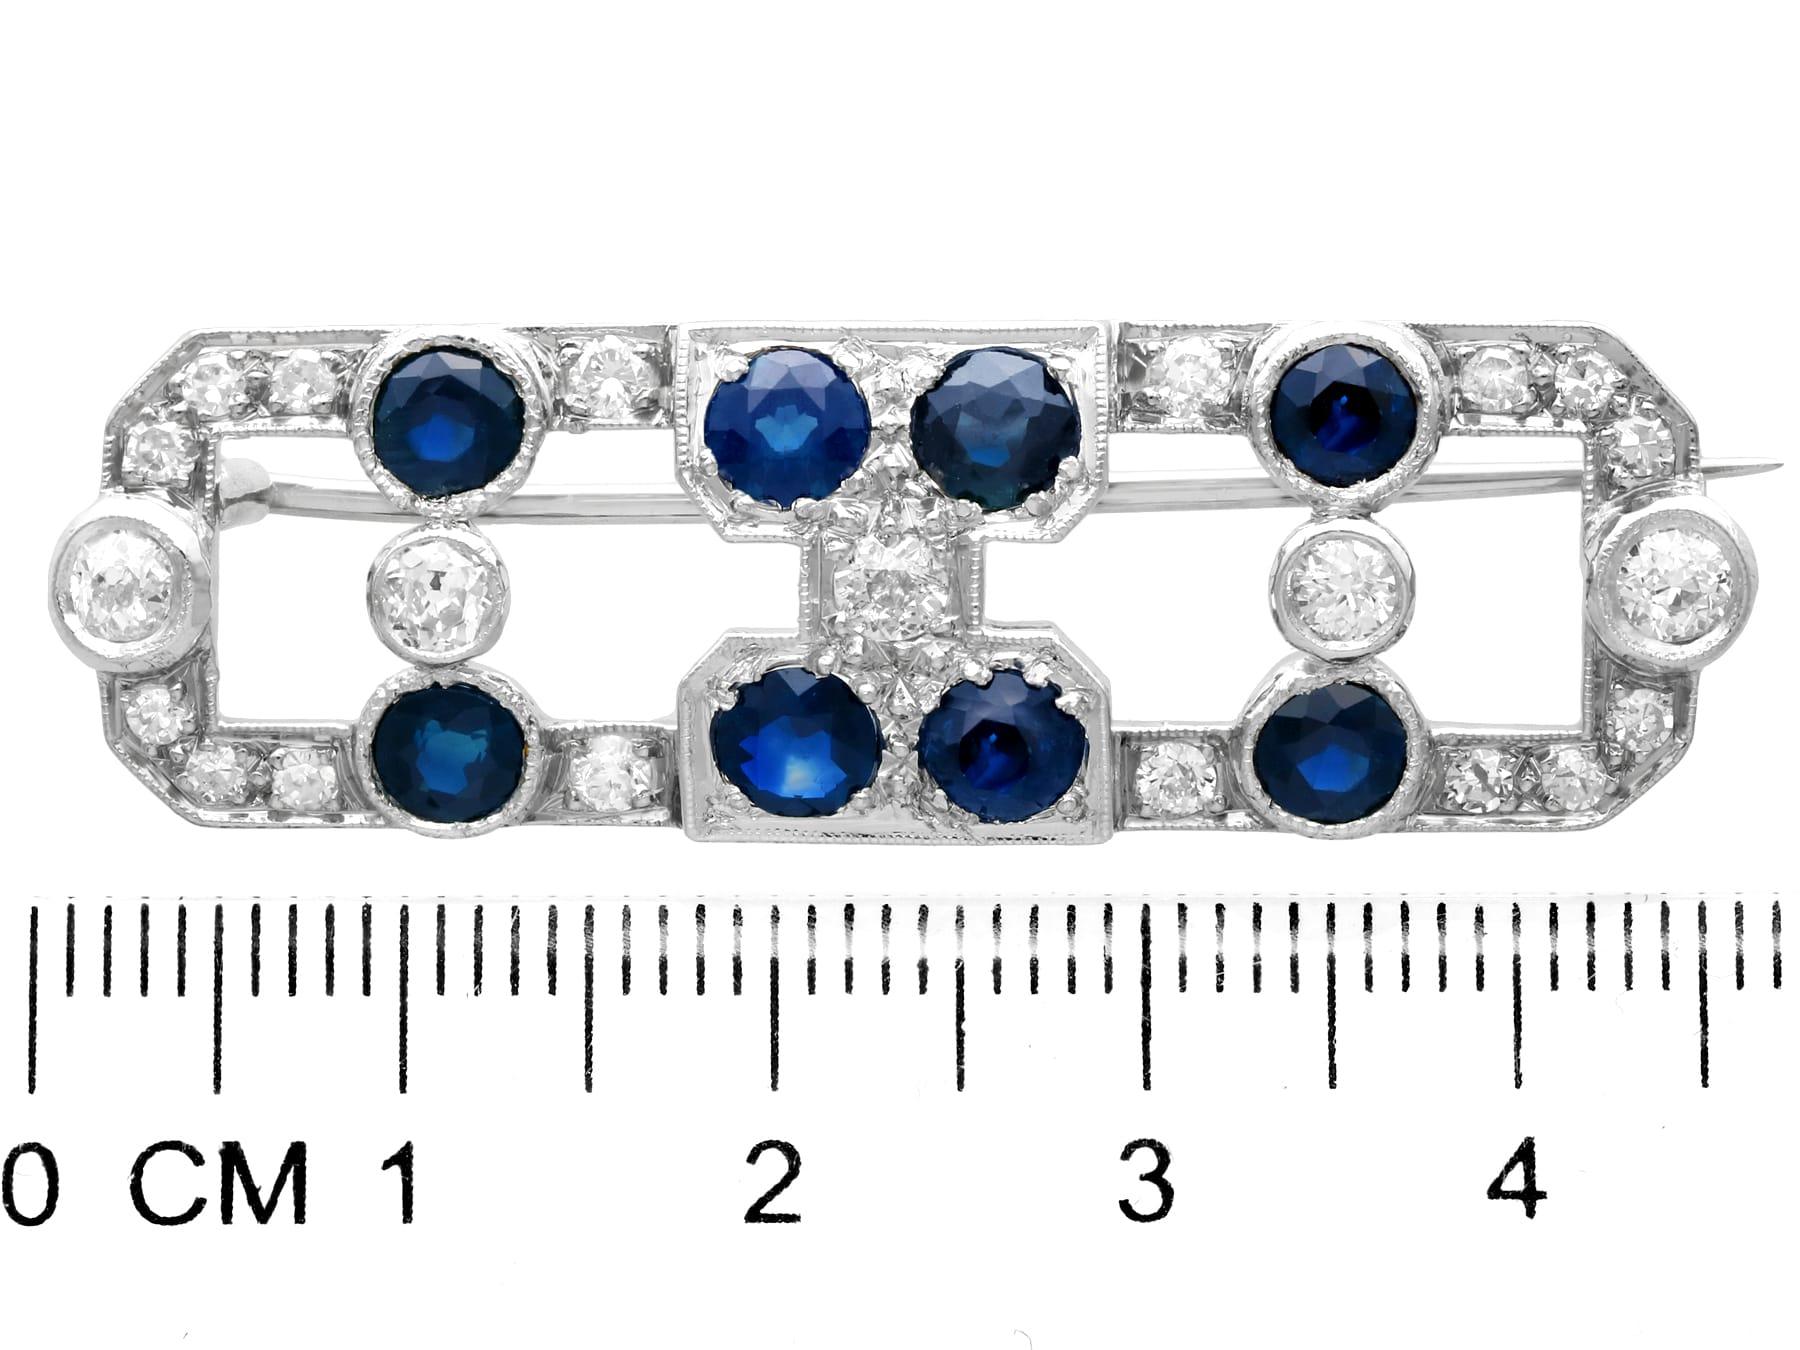 Art Deco 1920s 3.20 Carat Sapphire and 1.70 Carat Diamond White Gold Brooch For Sale 2